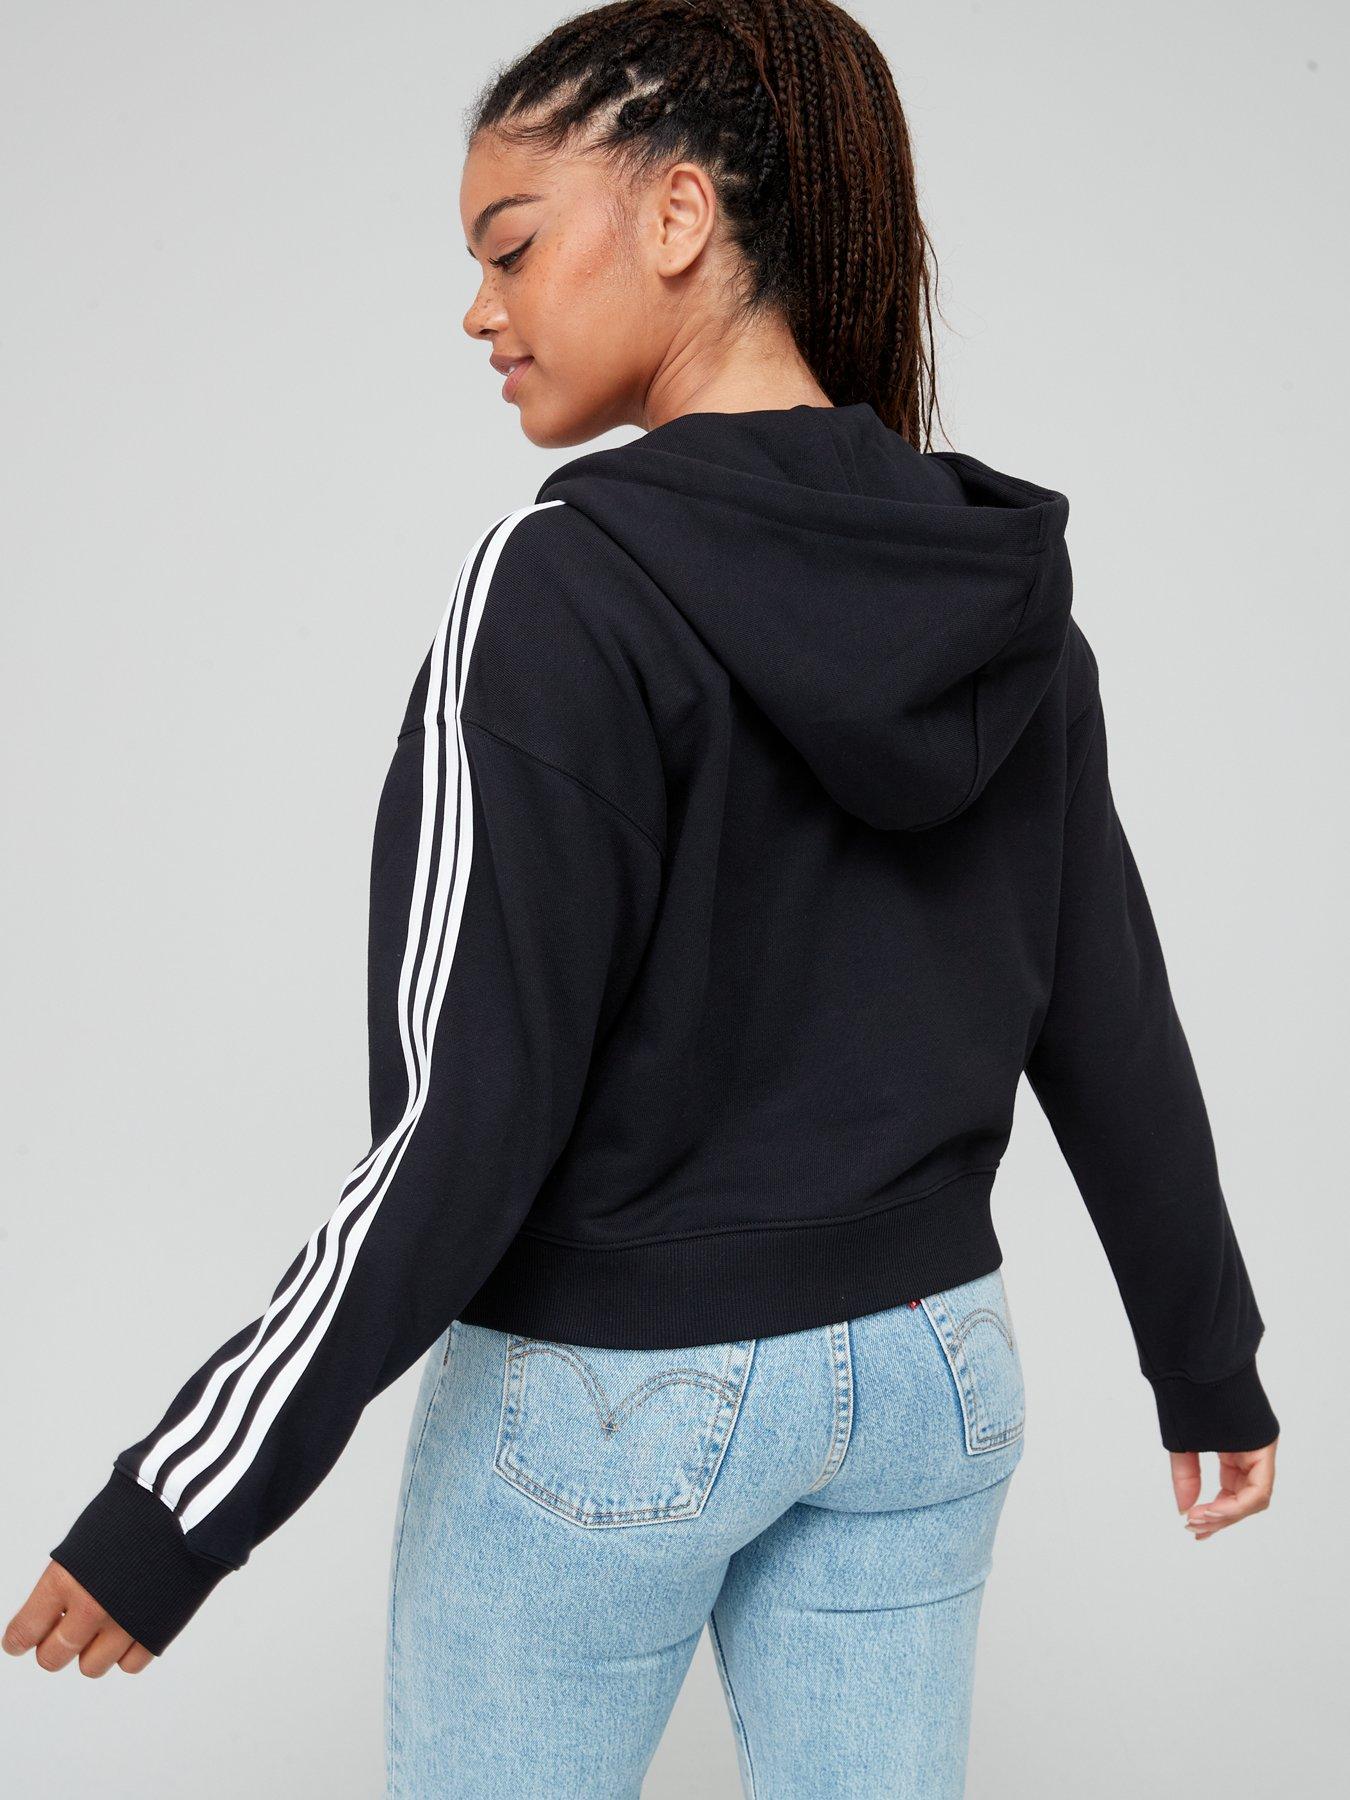 adidas Essentials Linear Full-Zip French Terry Hoodie - Black, Women's  Lifestyle